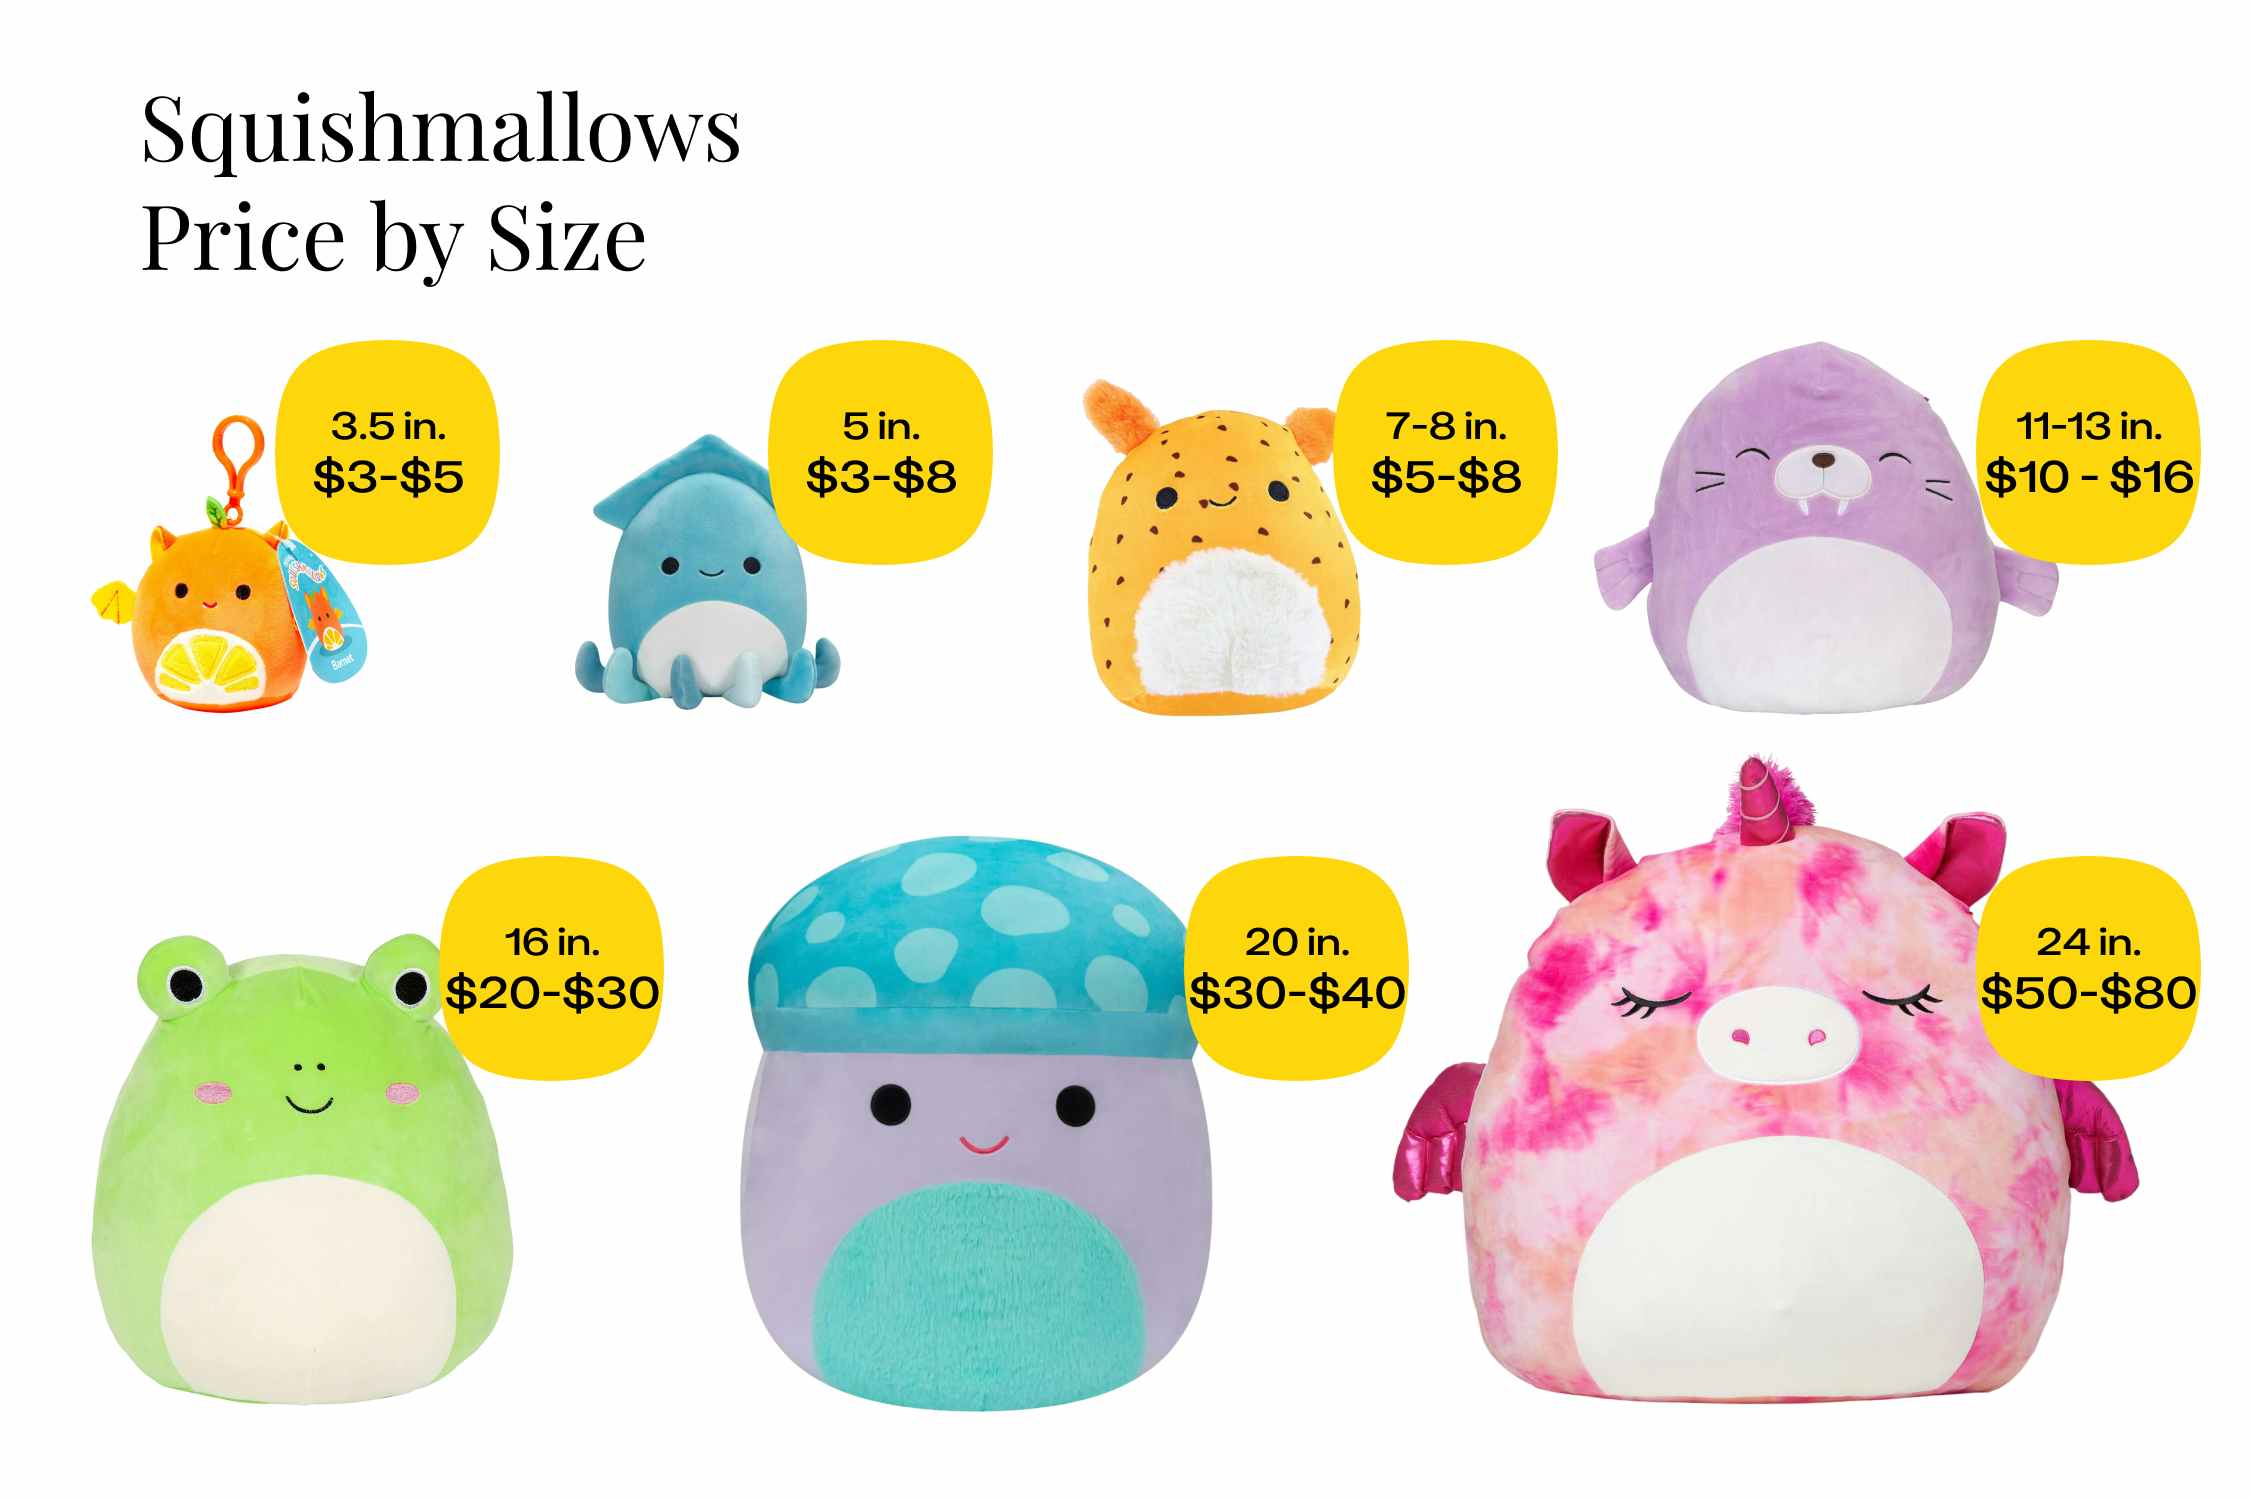 https://prod-cdn-thekrazycouponlady.imgix.net/wp-content/uploads/2023/08/squishmallows-prices-by-size-graphic-1692206960-1692206960.png?auto=format&fit=fill&q=25